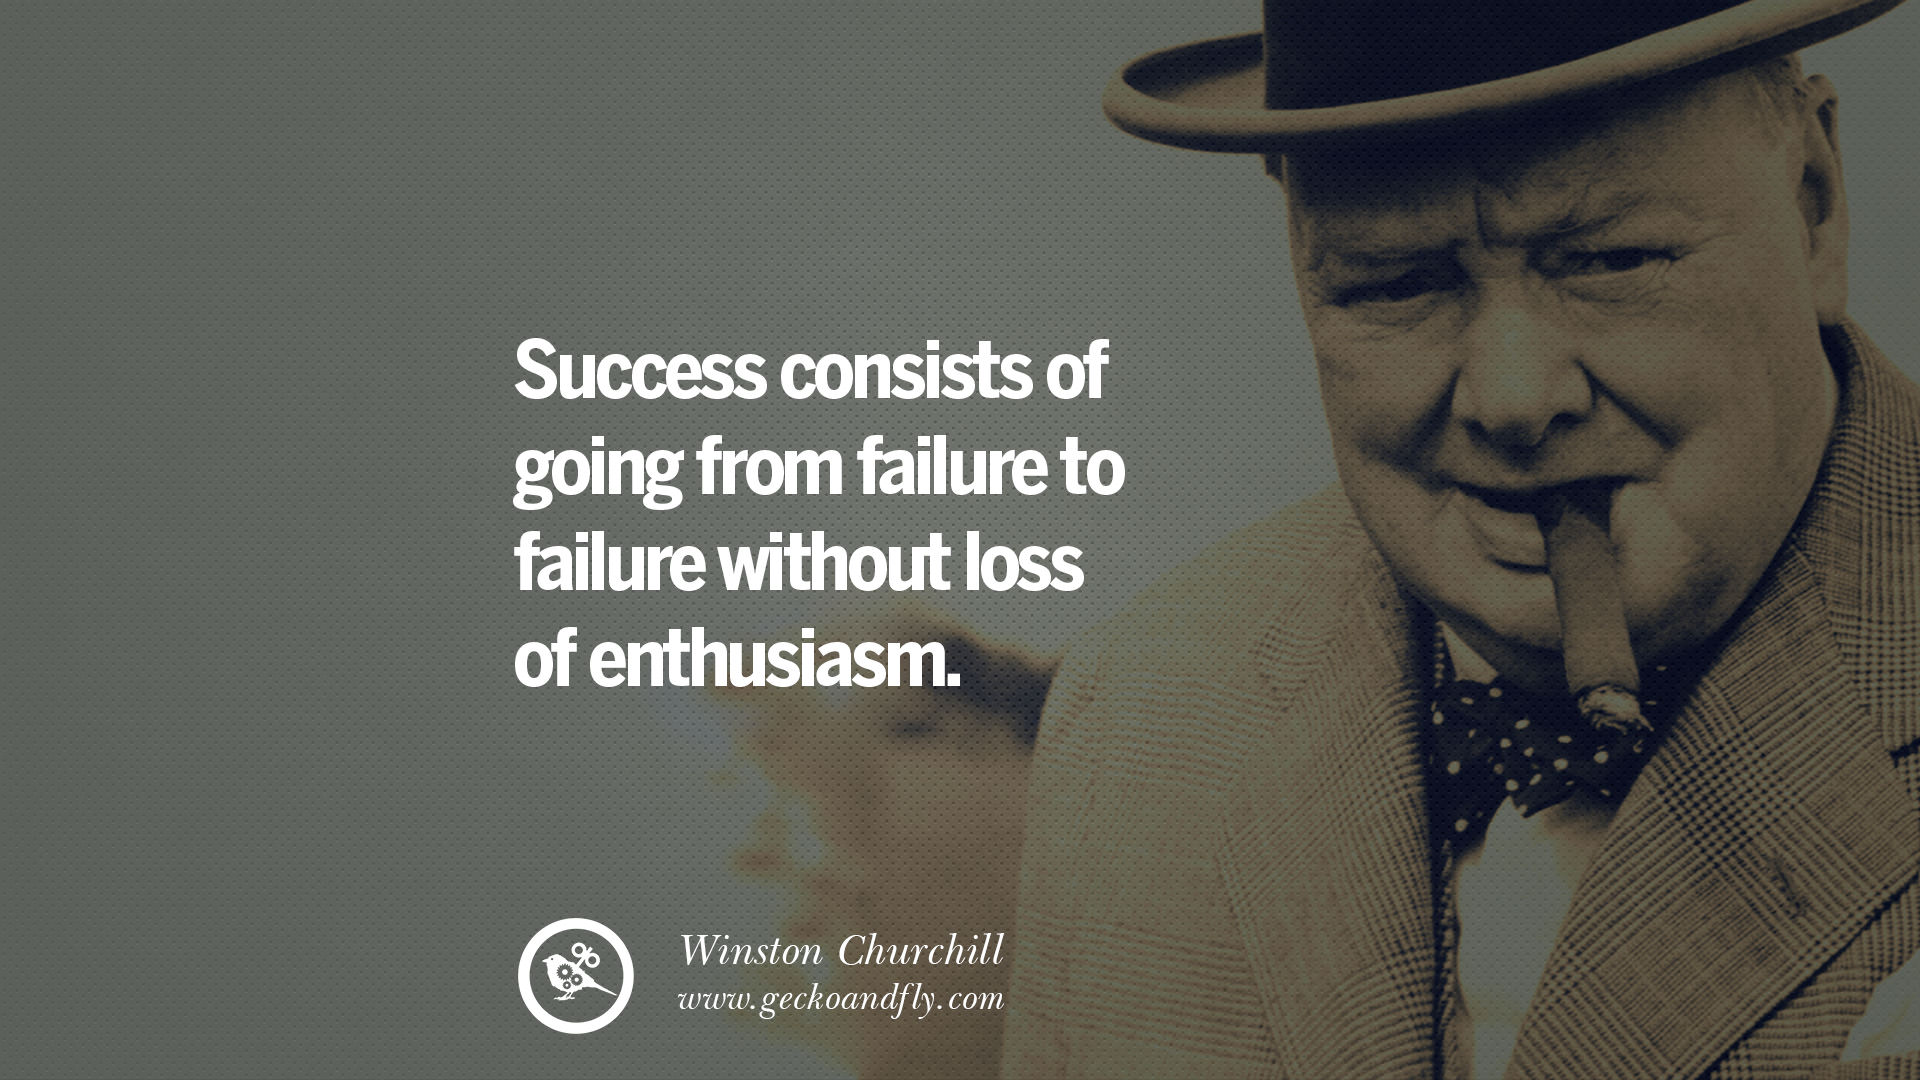 30 Sir Winston Churchill Quotes and Speeches on Success, Courage, and